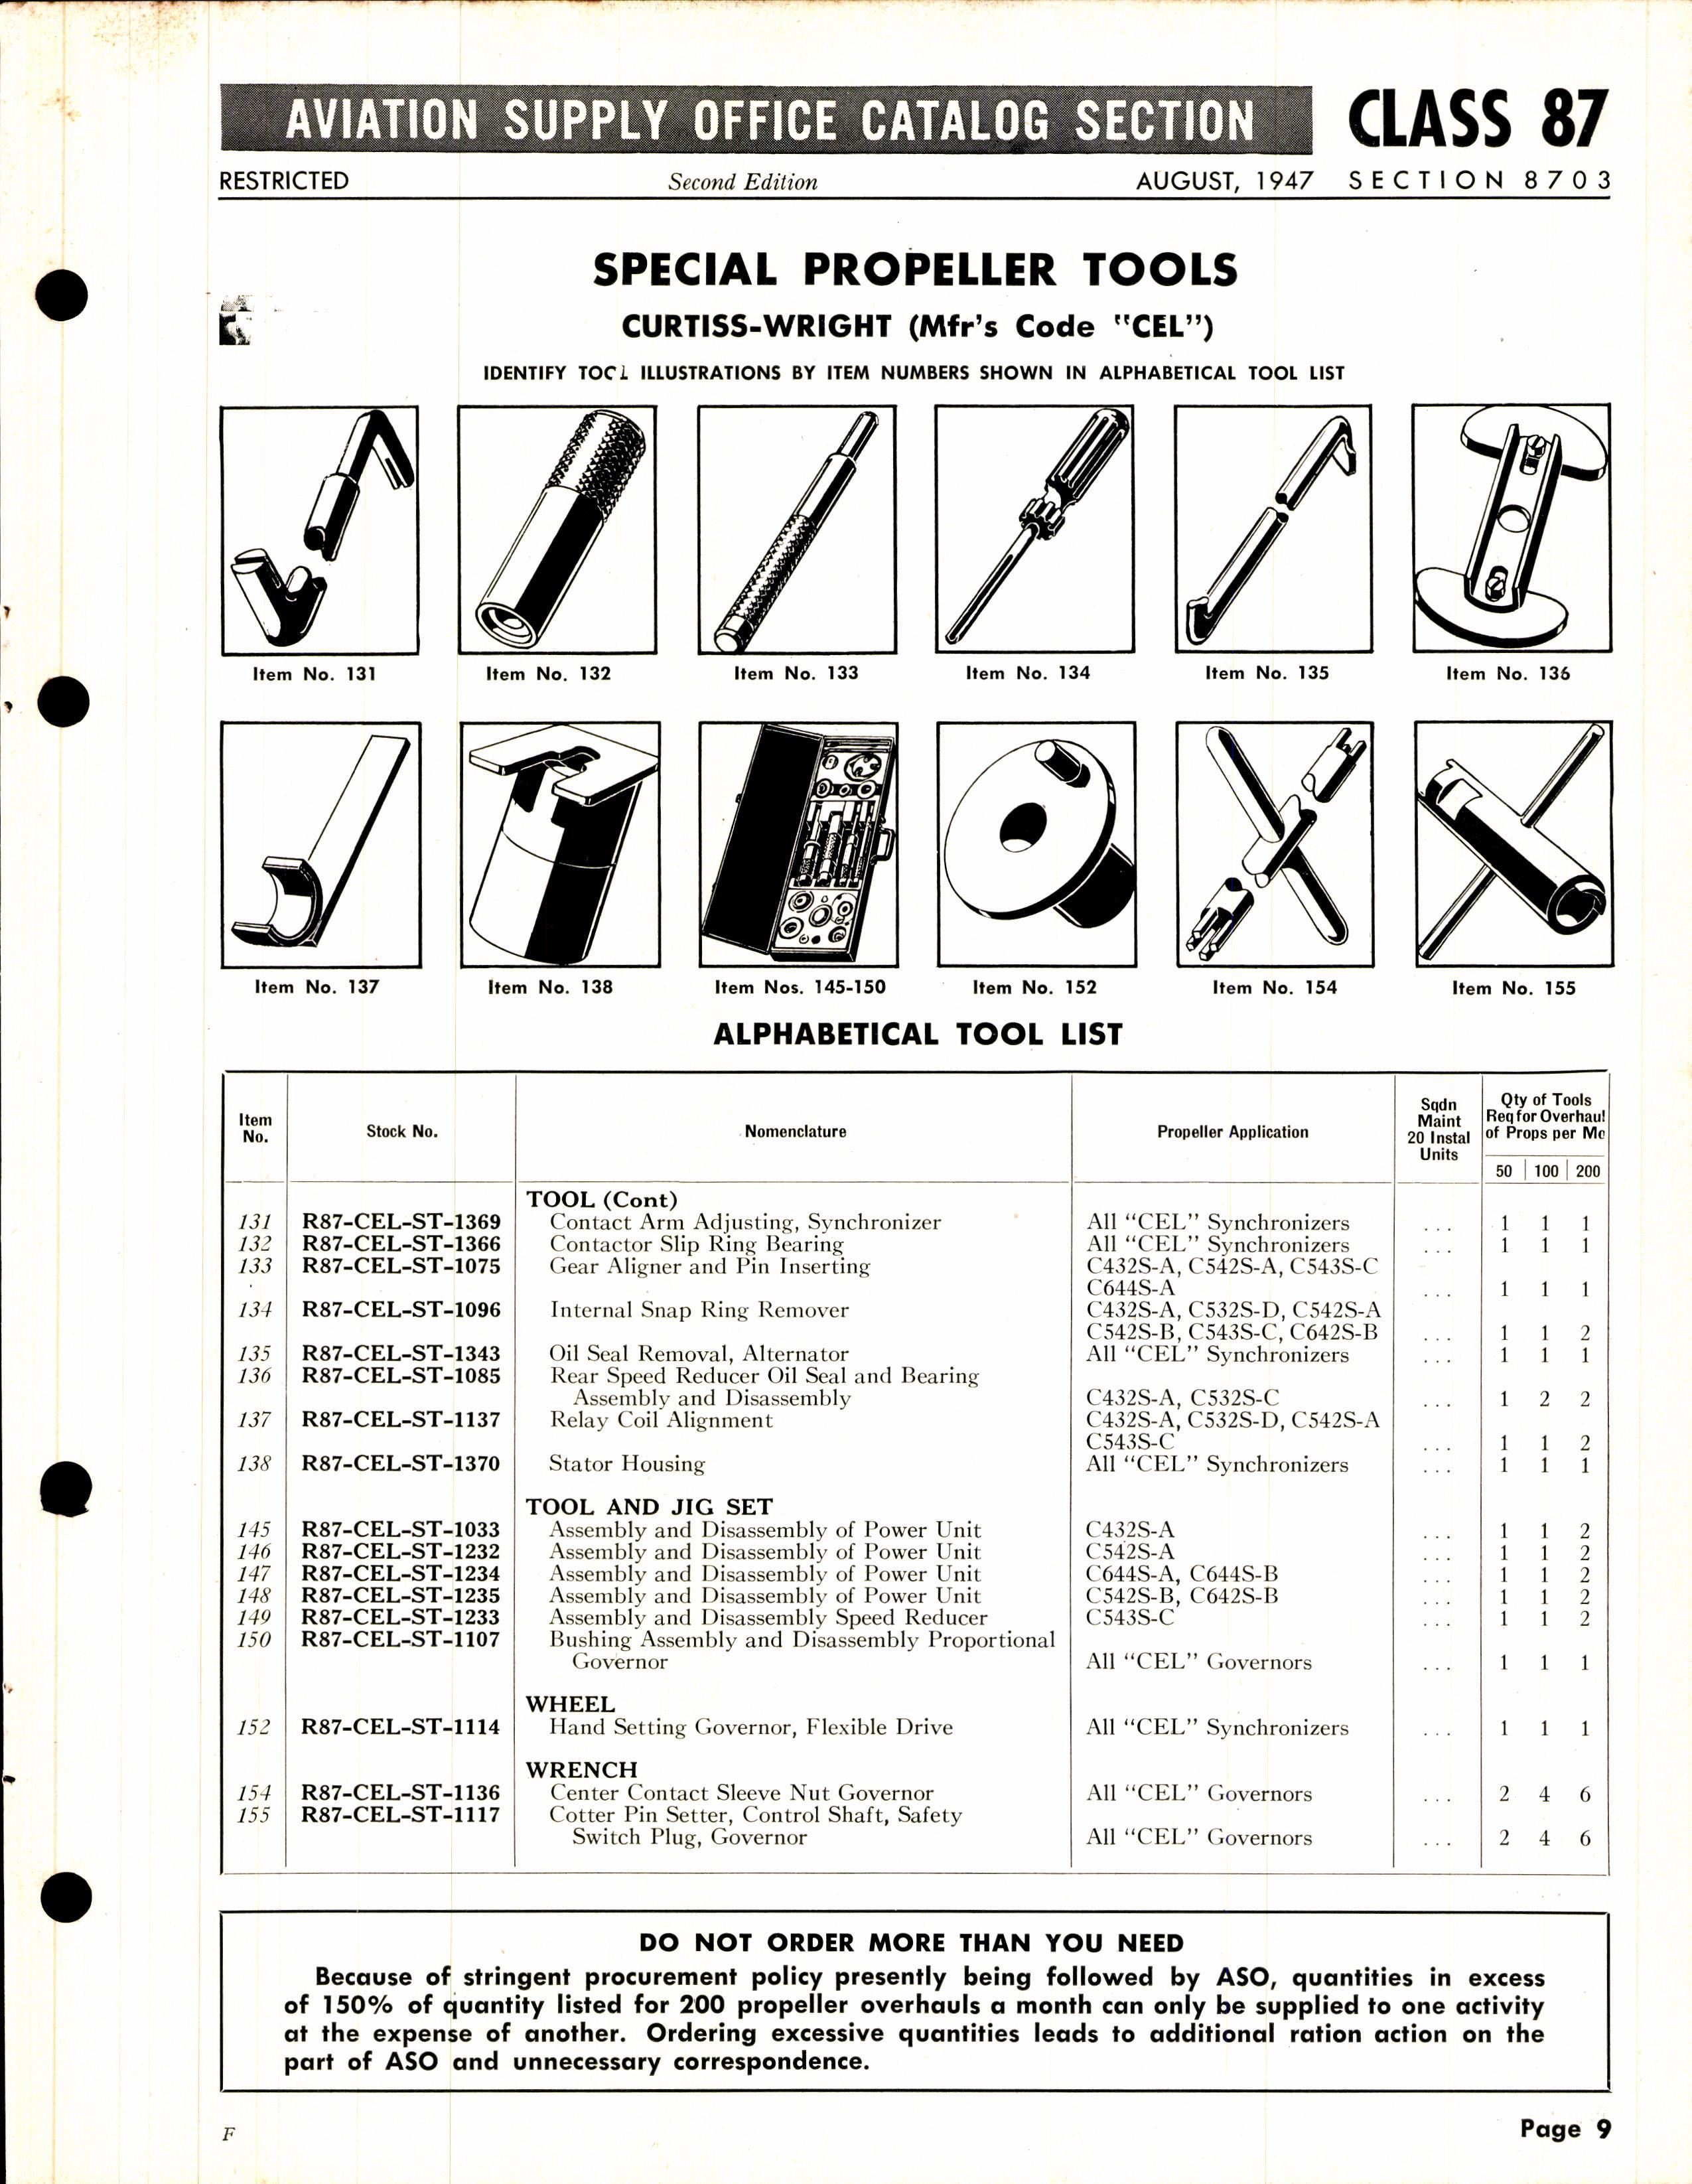 Sample page 9 from AirCorps Library document: Special Propeller Tools and Test Equipment